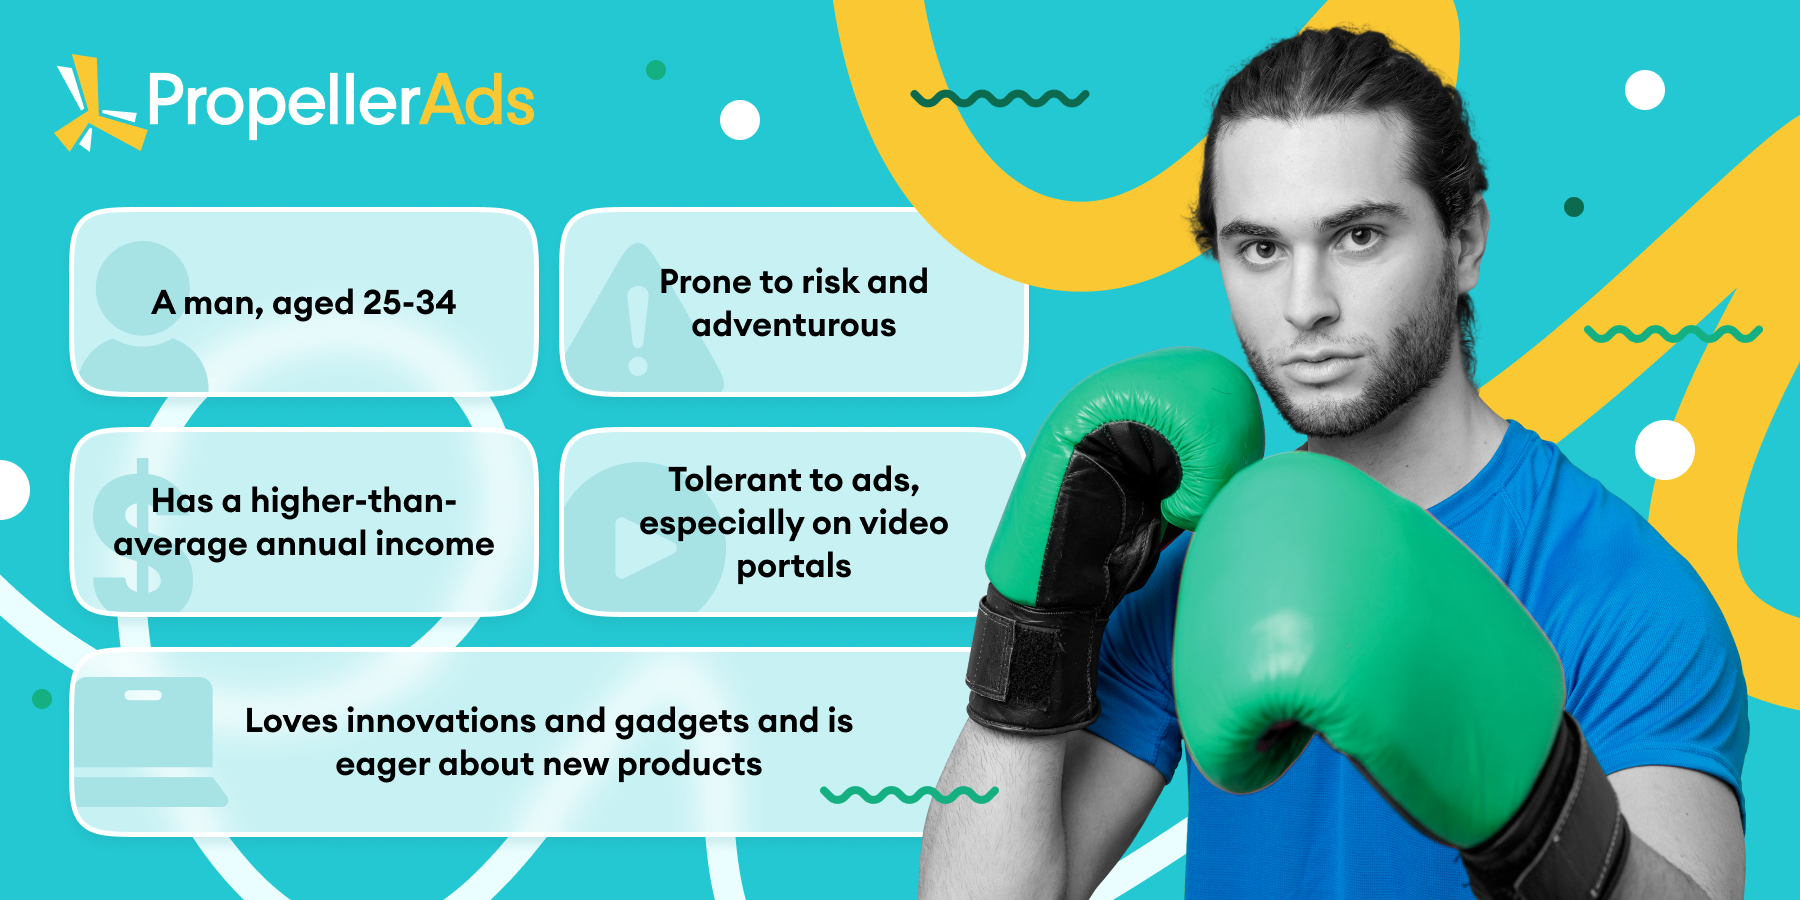 propellerads-mma-and-boxing-fans-persona